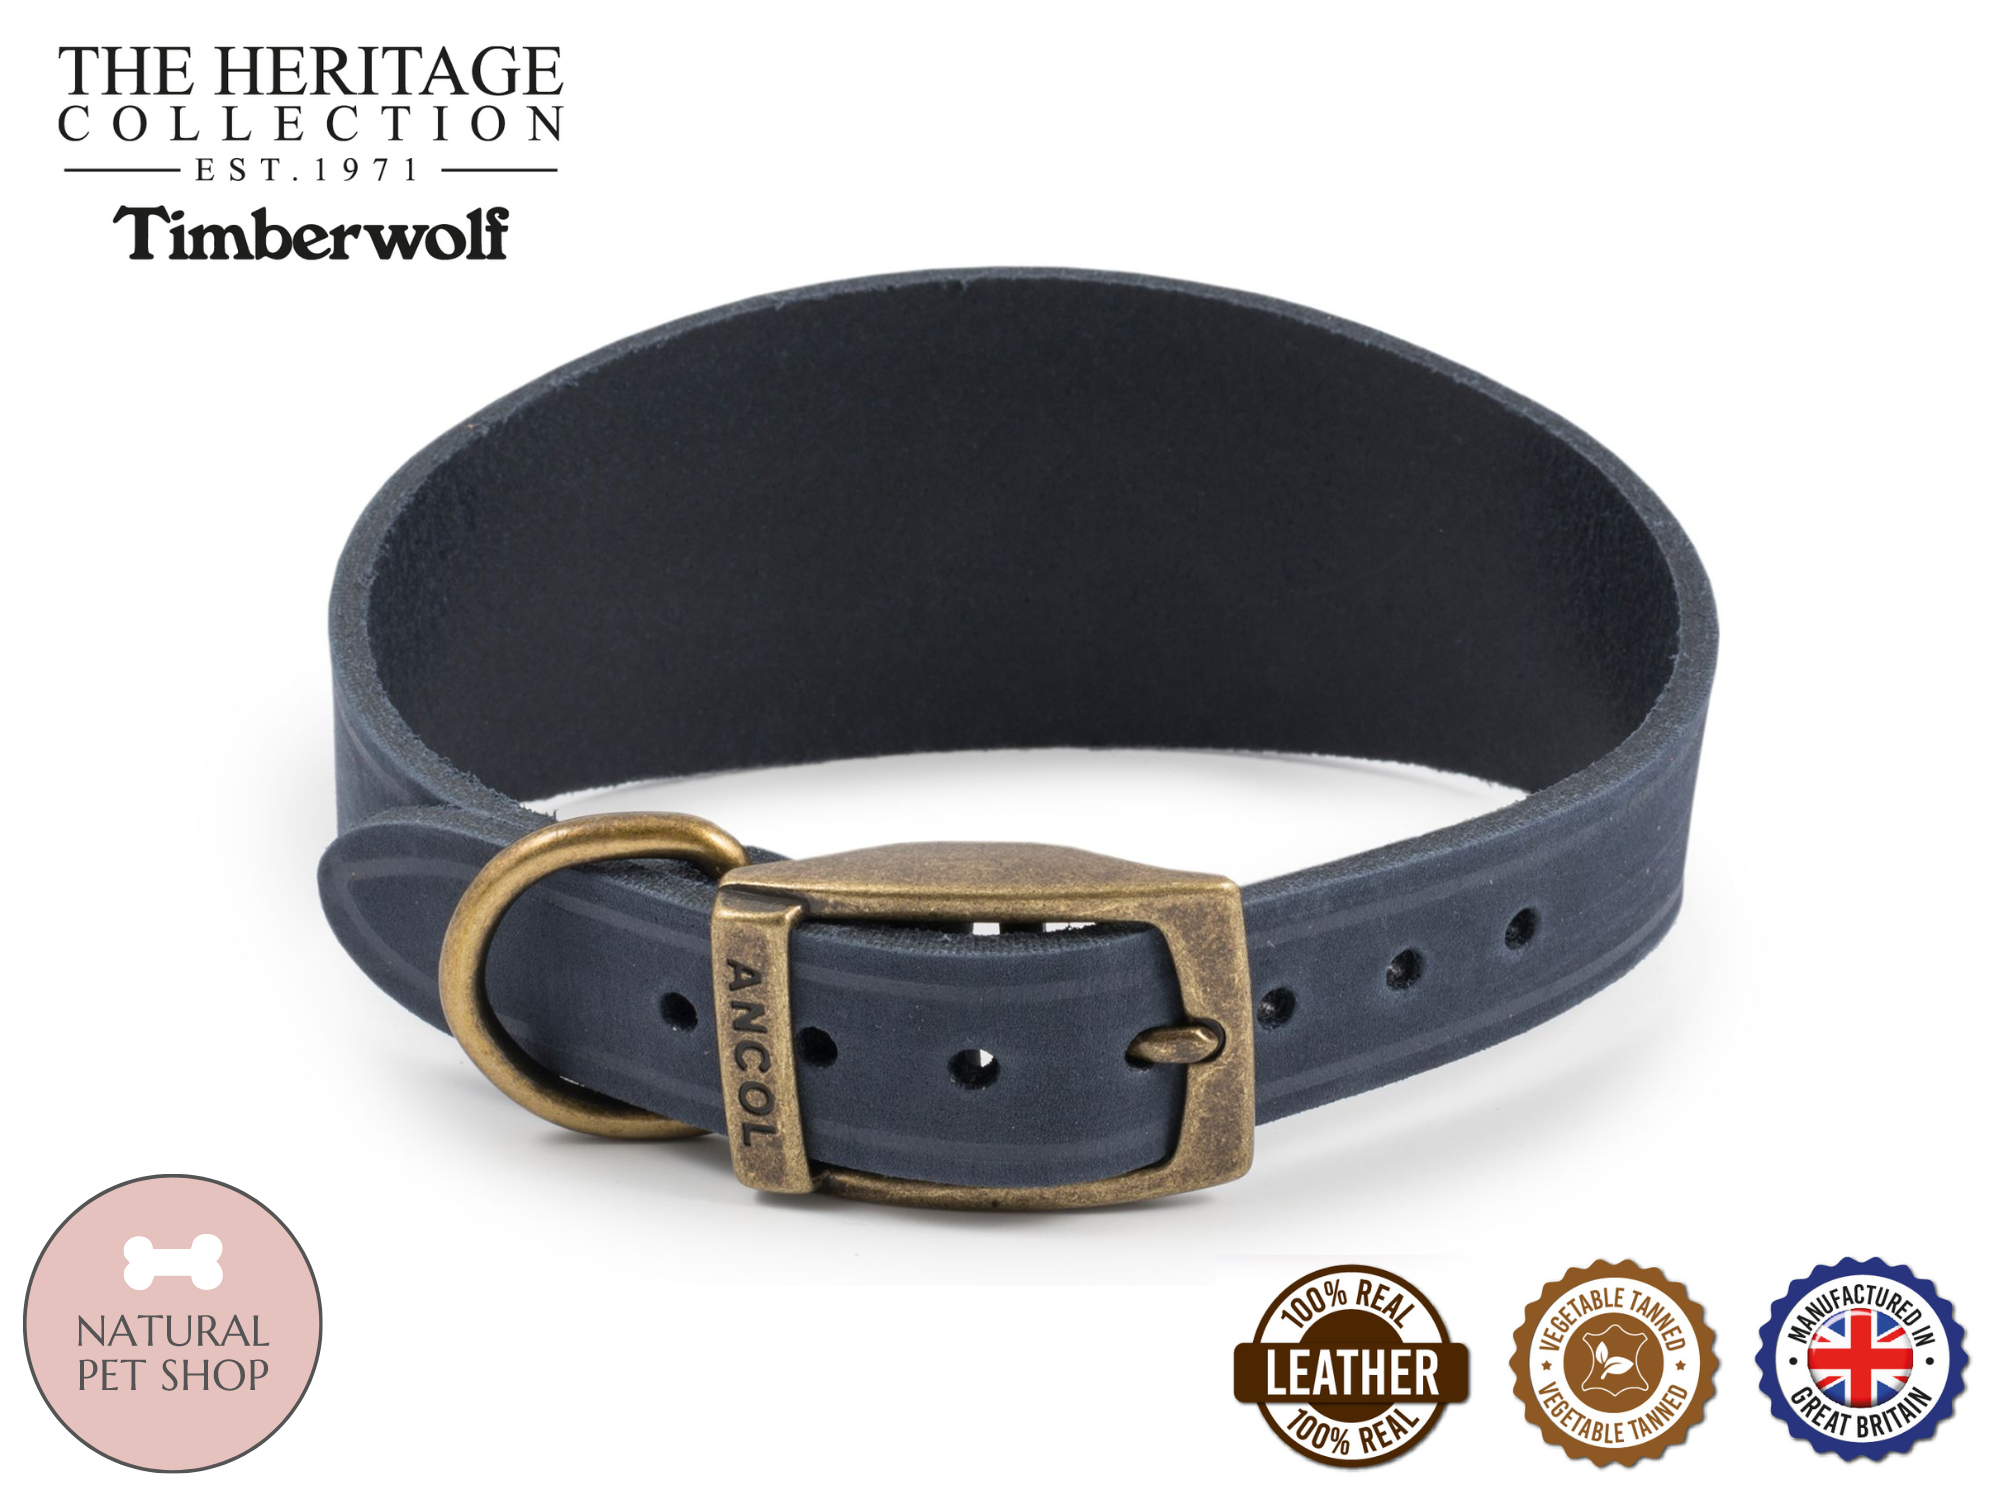 Timberwolf | Leather Collar for Greyhounds & Whippets